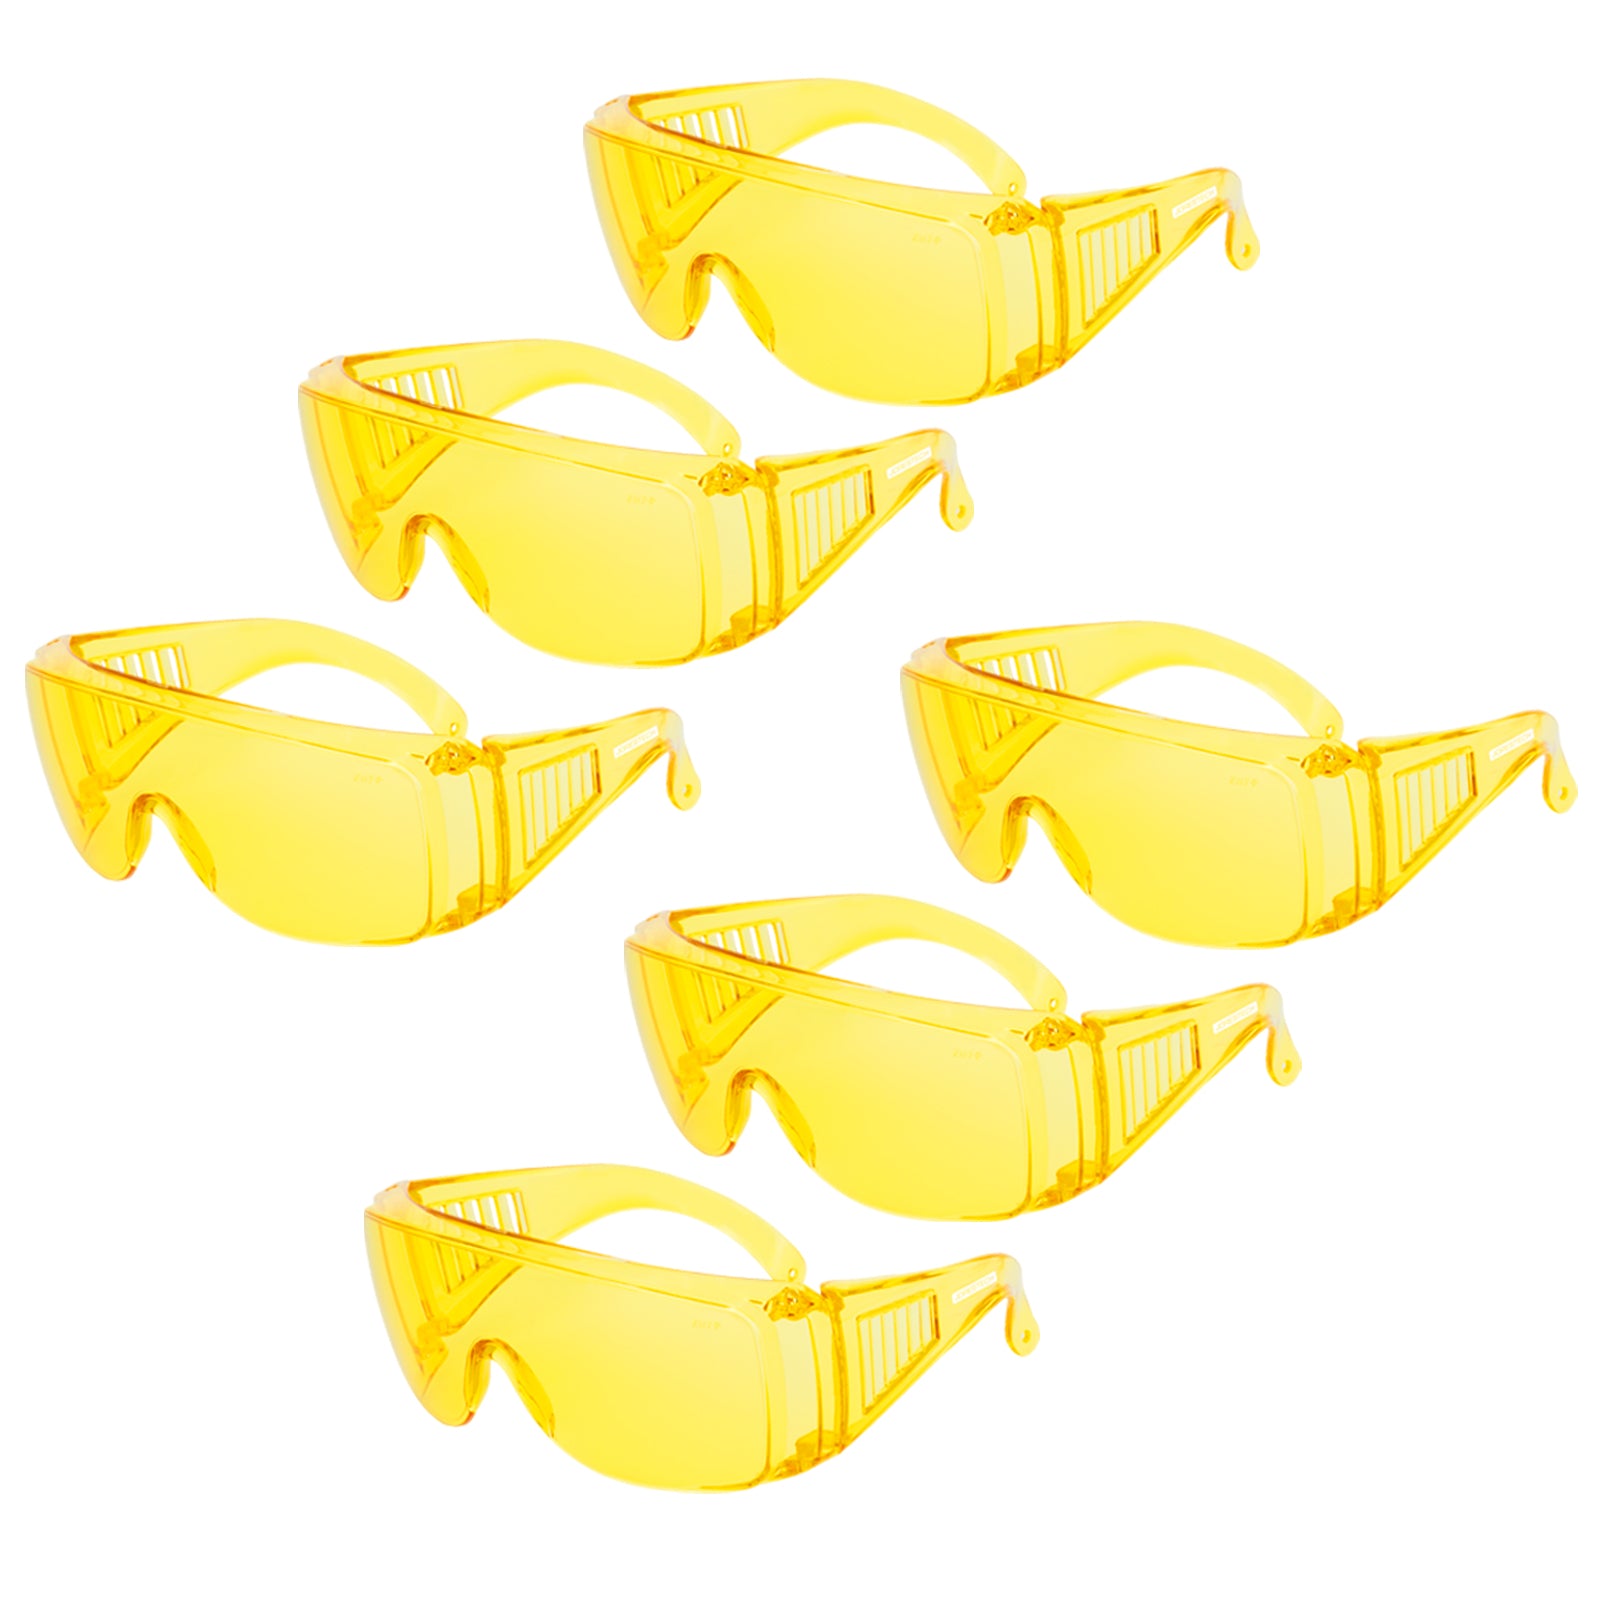 pack of 6 yellow Jorestech safety overglasses for high impact protection on a white background